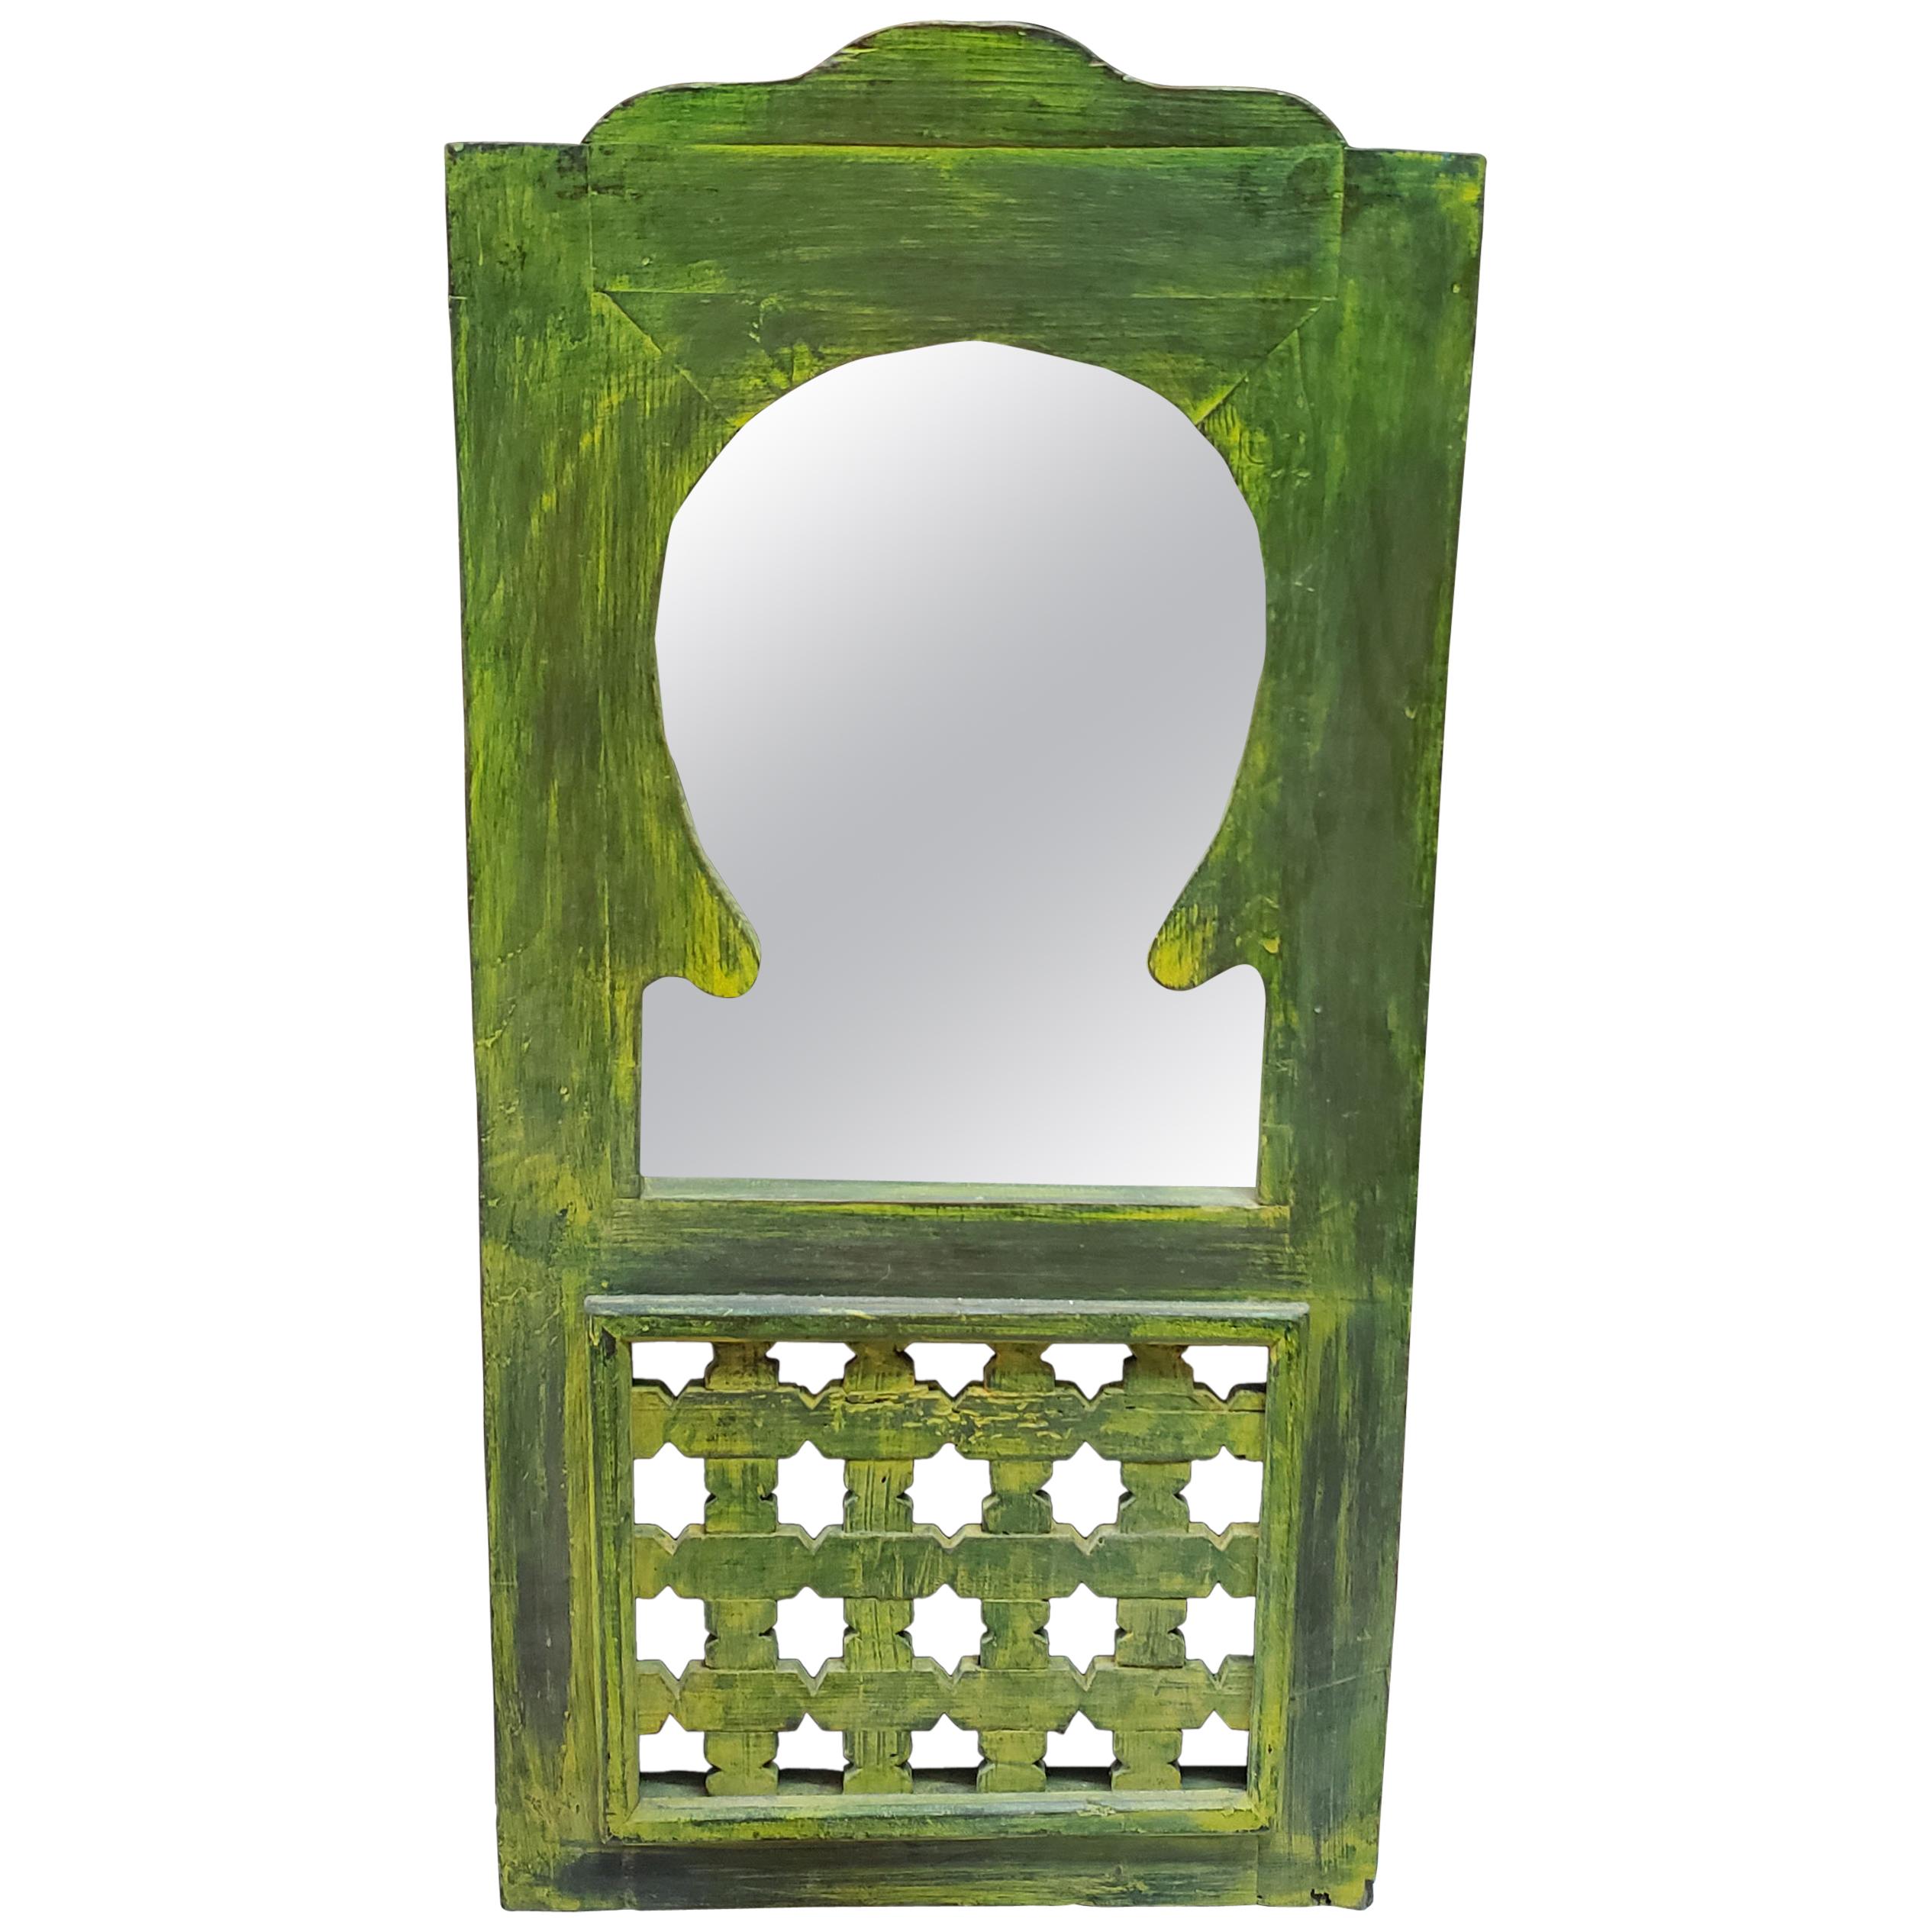 Moroccan Lime Green Wash Repurposed Wooden Frame, Mirror Extra For Sale